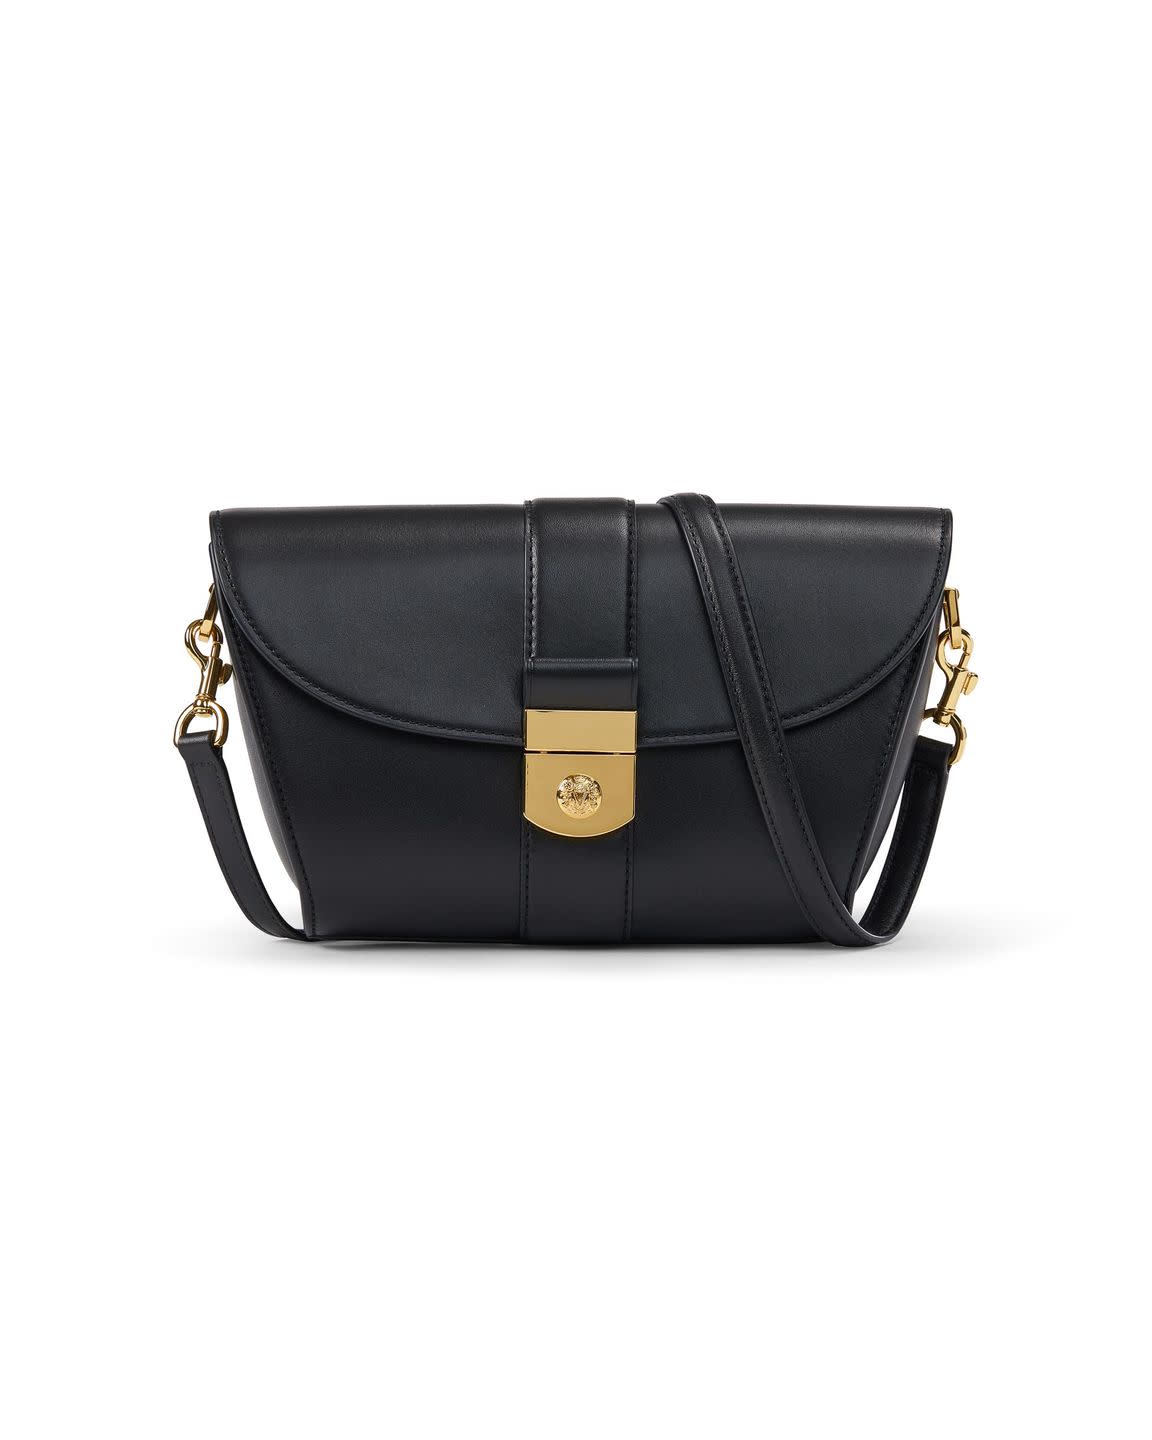 a black bag with a gold buckle